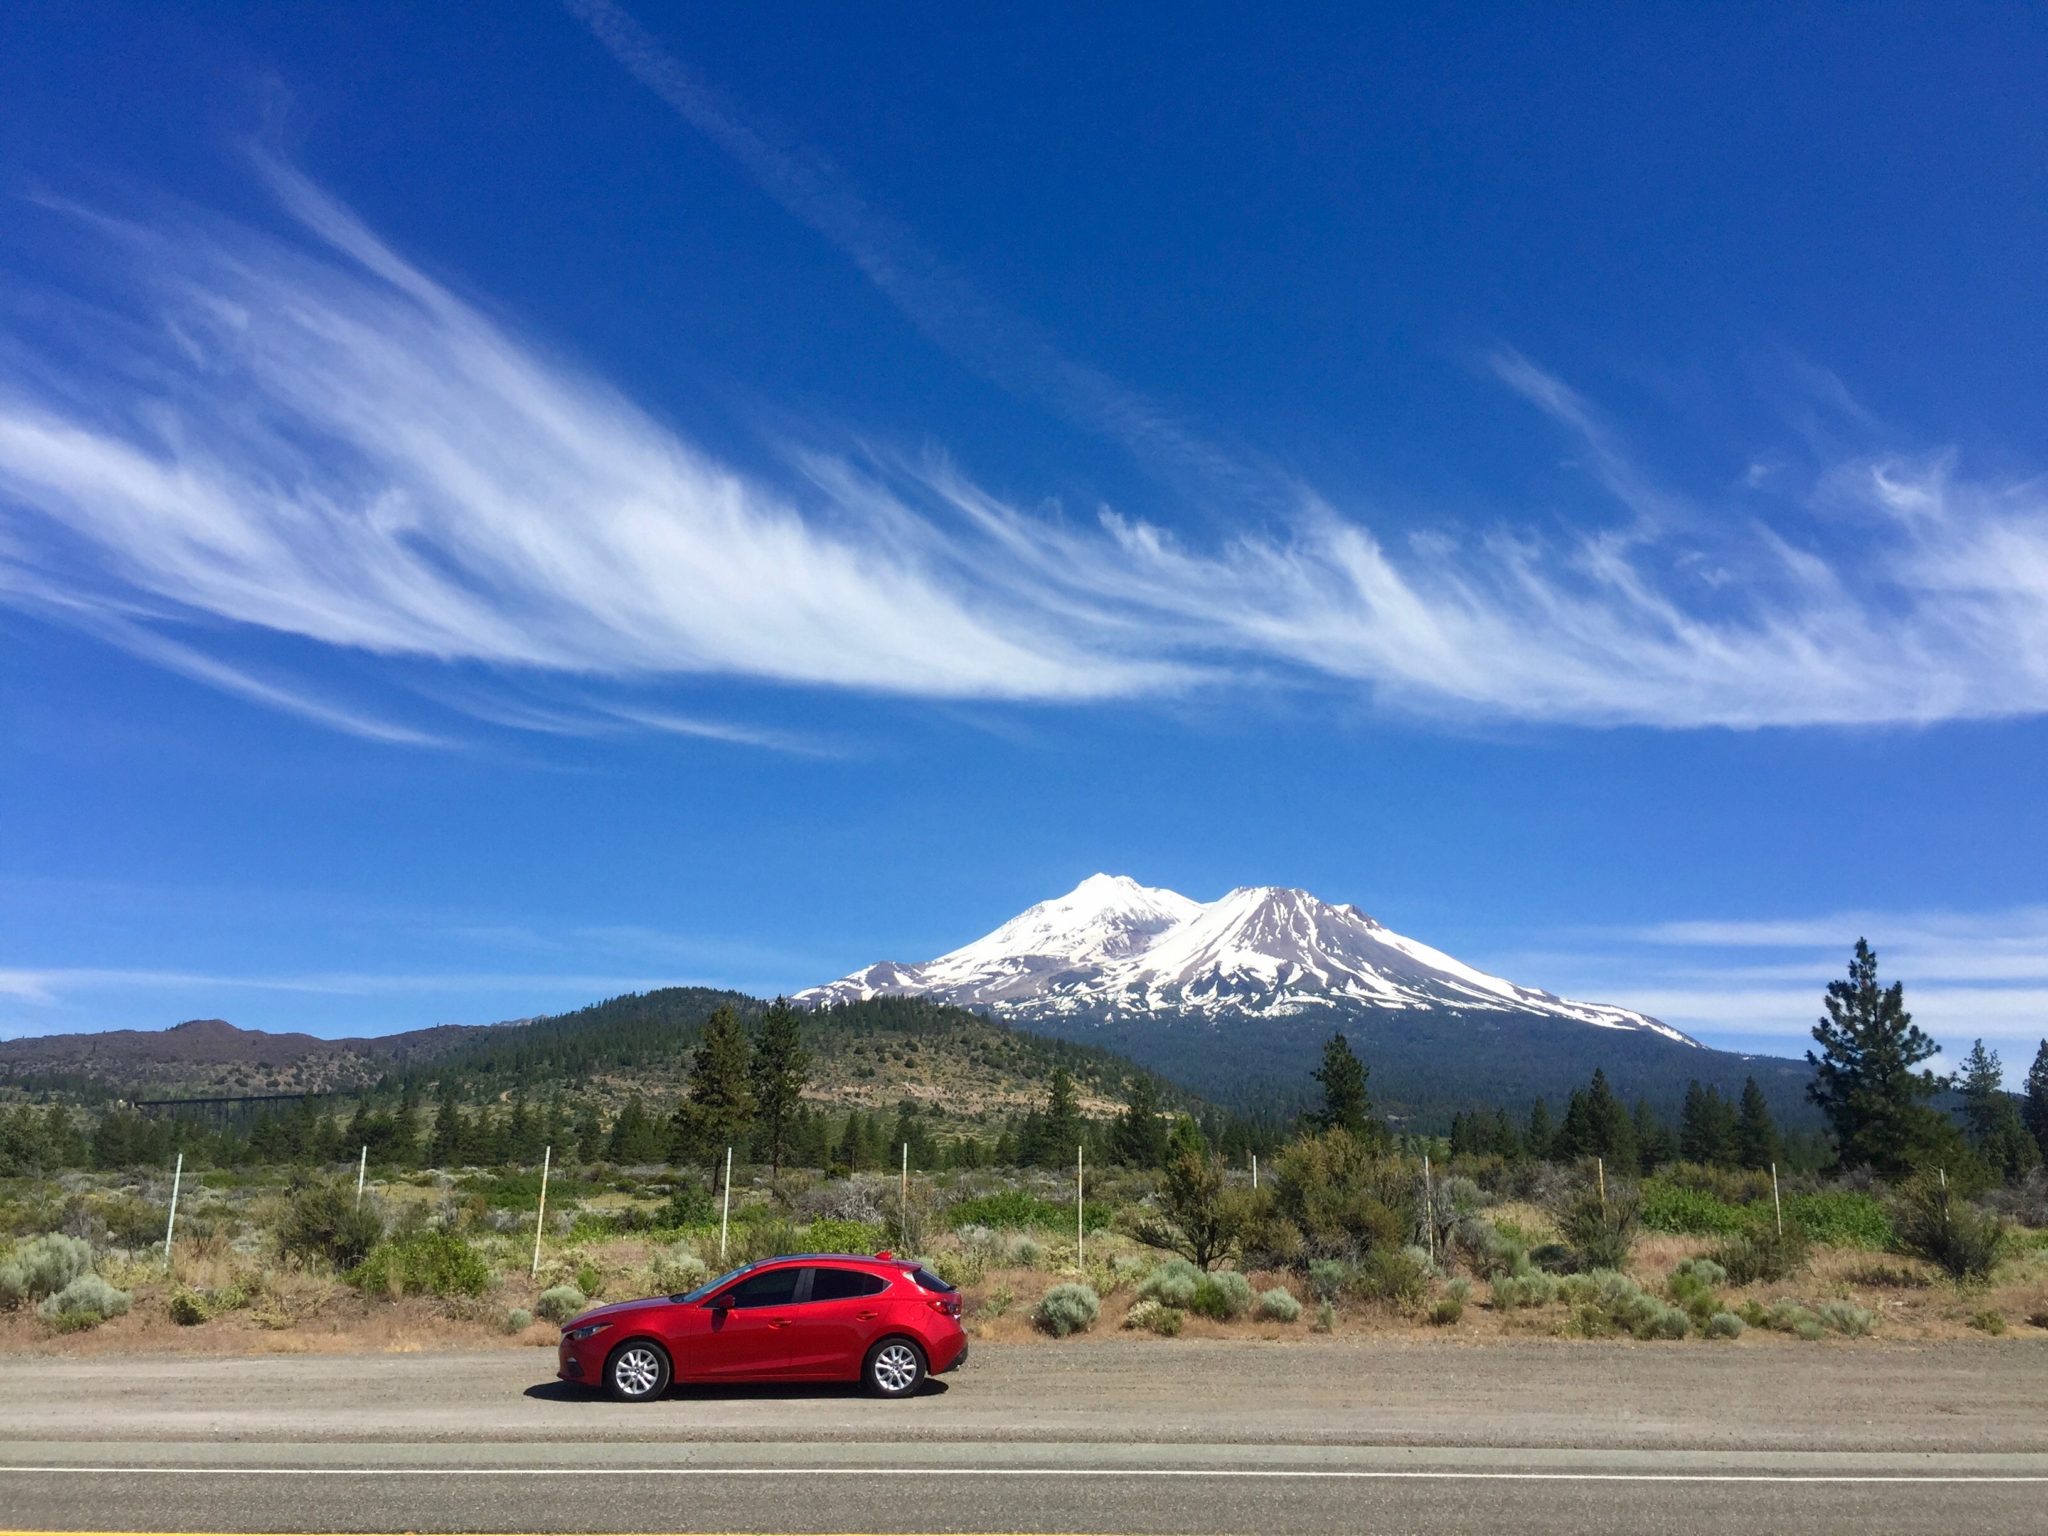 My red Mazda in front of Mount Shasta. I used some great packing hacks to fit in everything I needed!